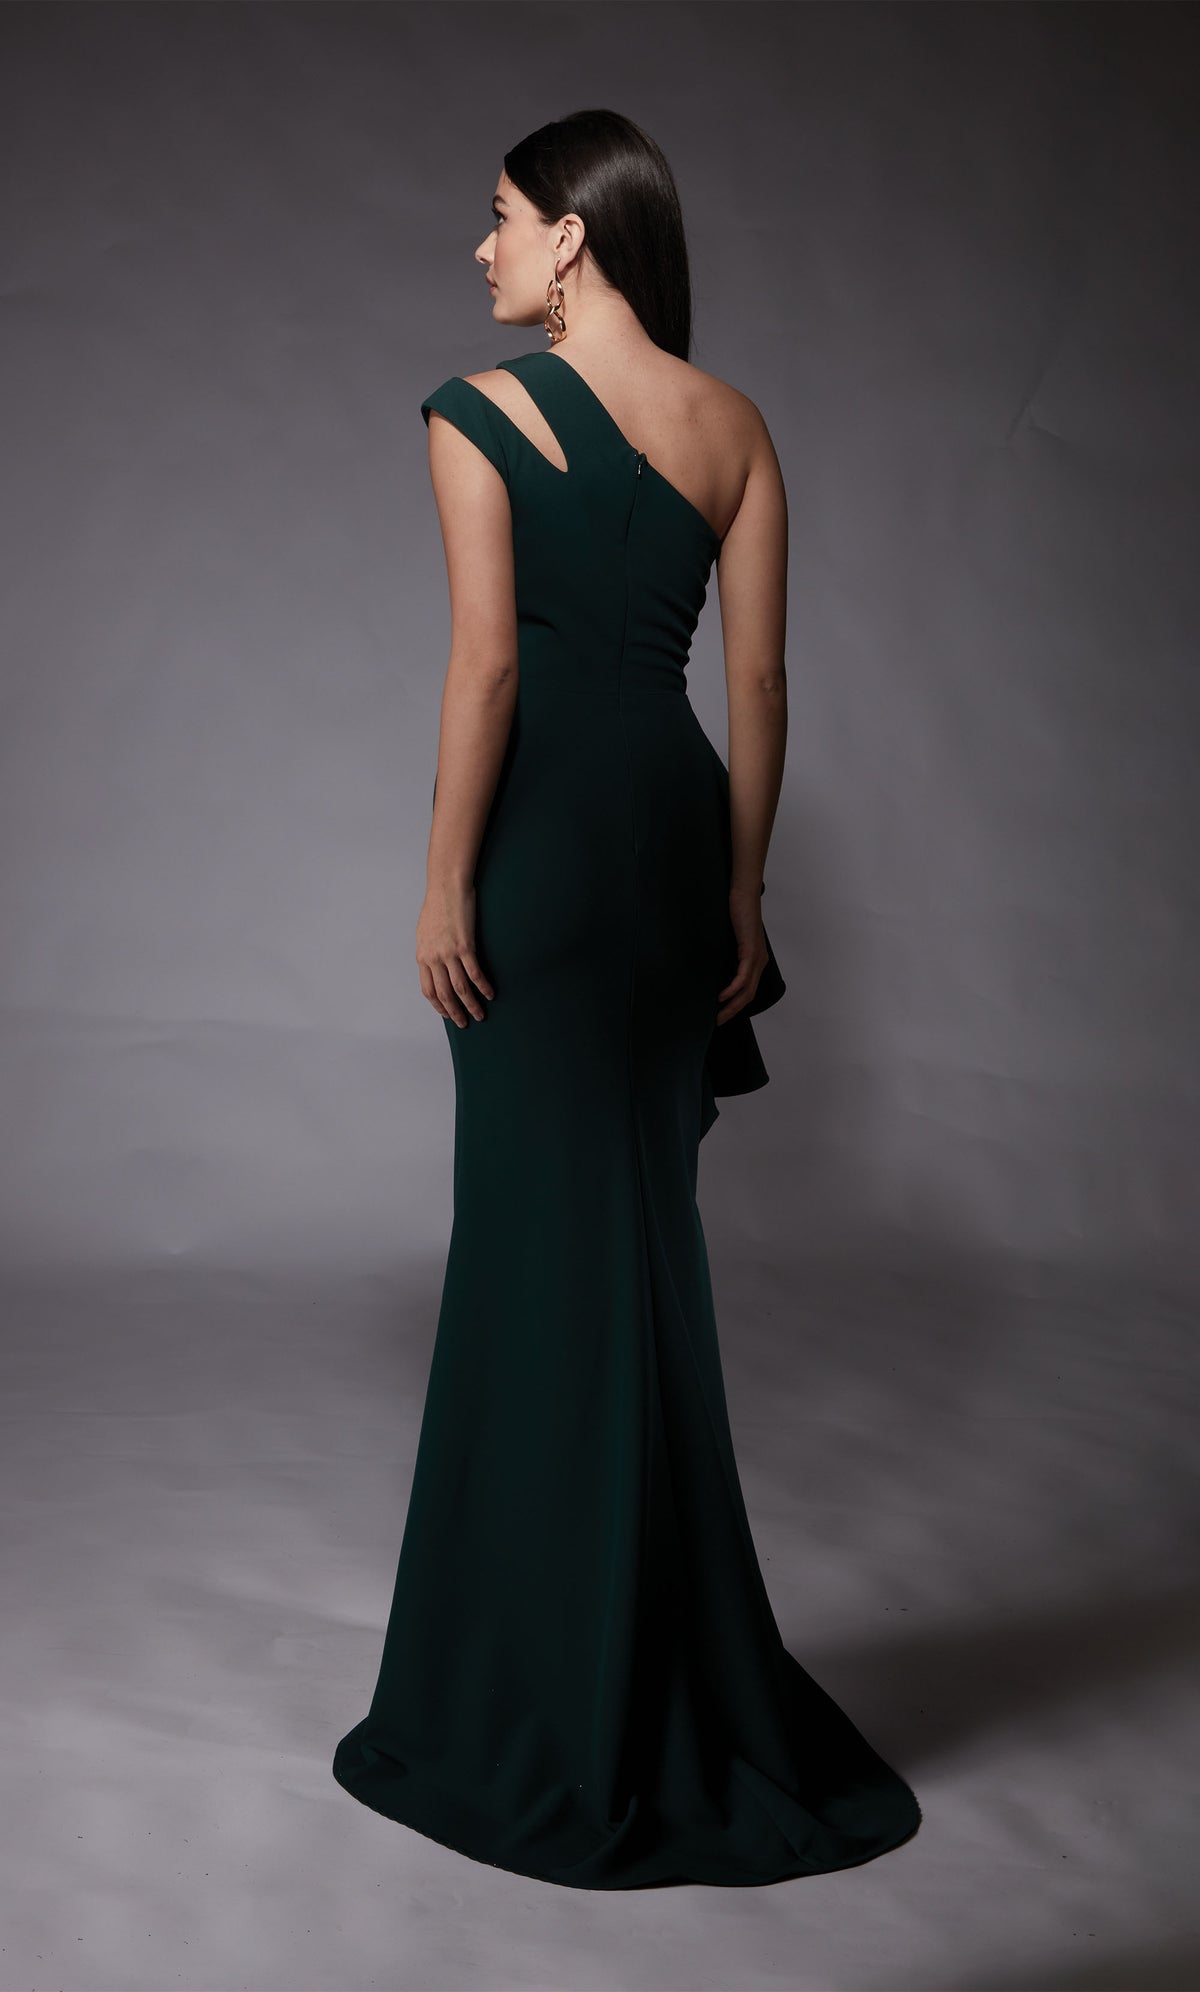 Forest green long evening gown highlighting a cutout, one shoulder neckline, a zip-up back, and slight train.